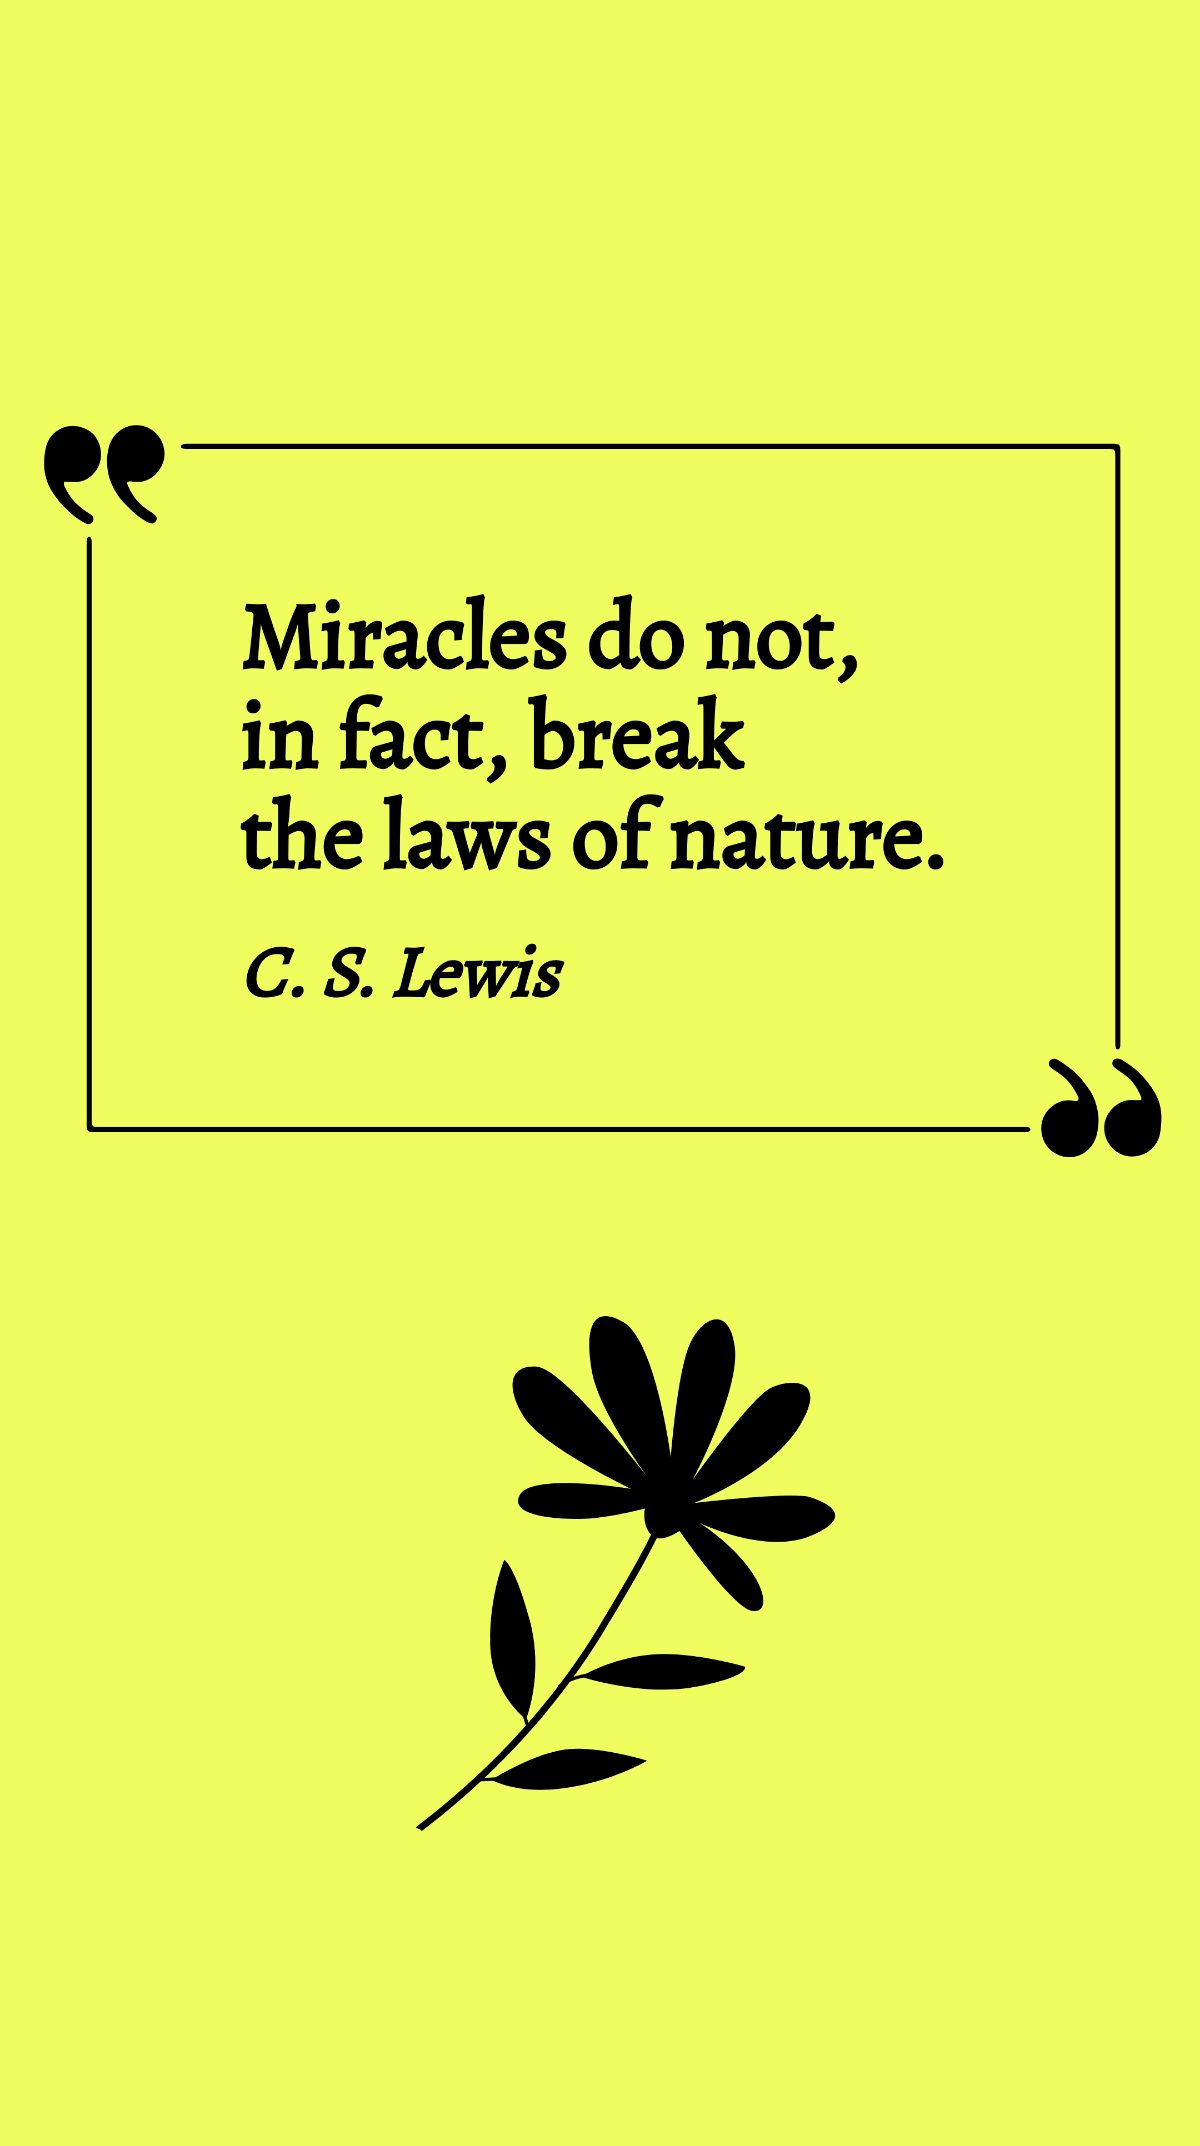 Free C. S. Lewis - Miracles do not, in fact, break the laws of nature. Template